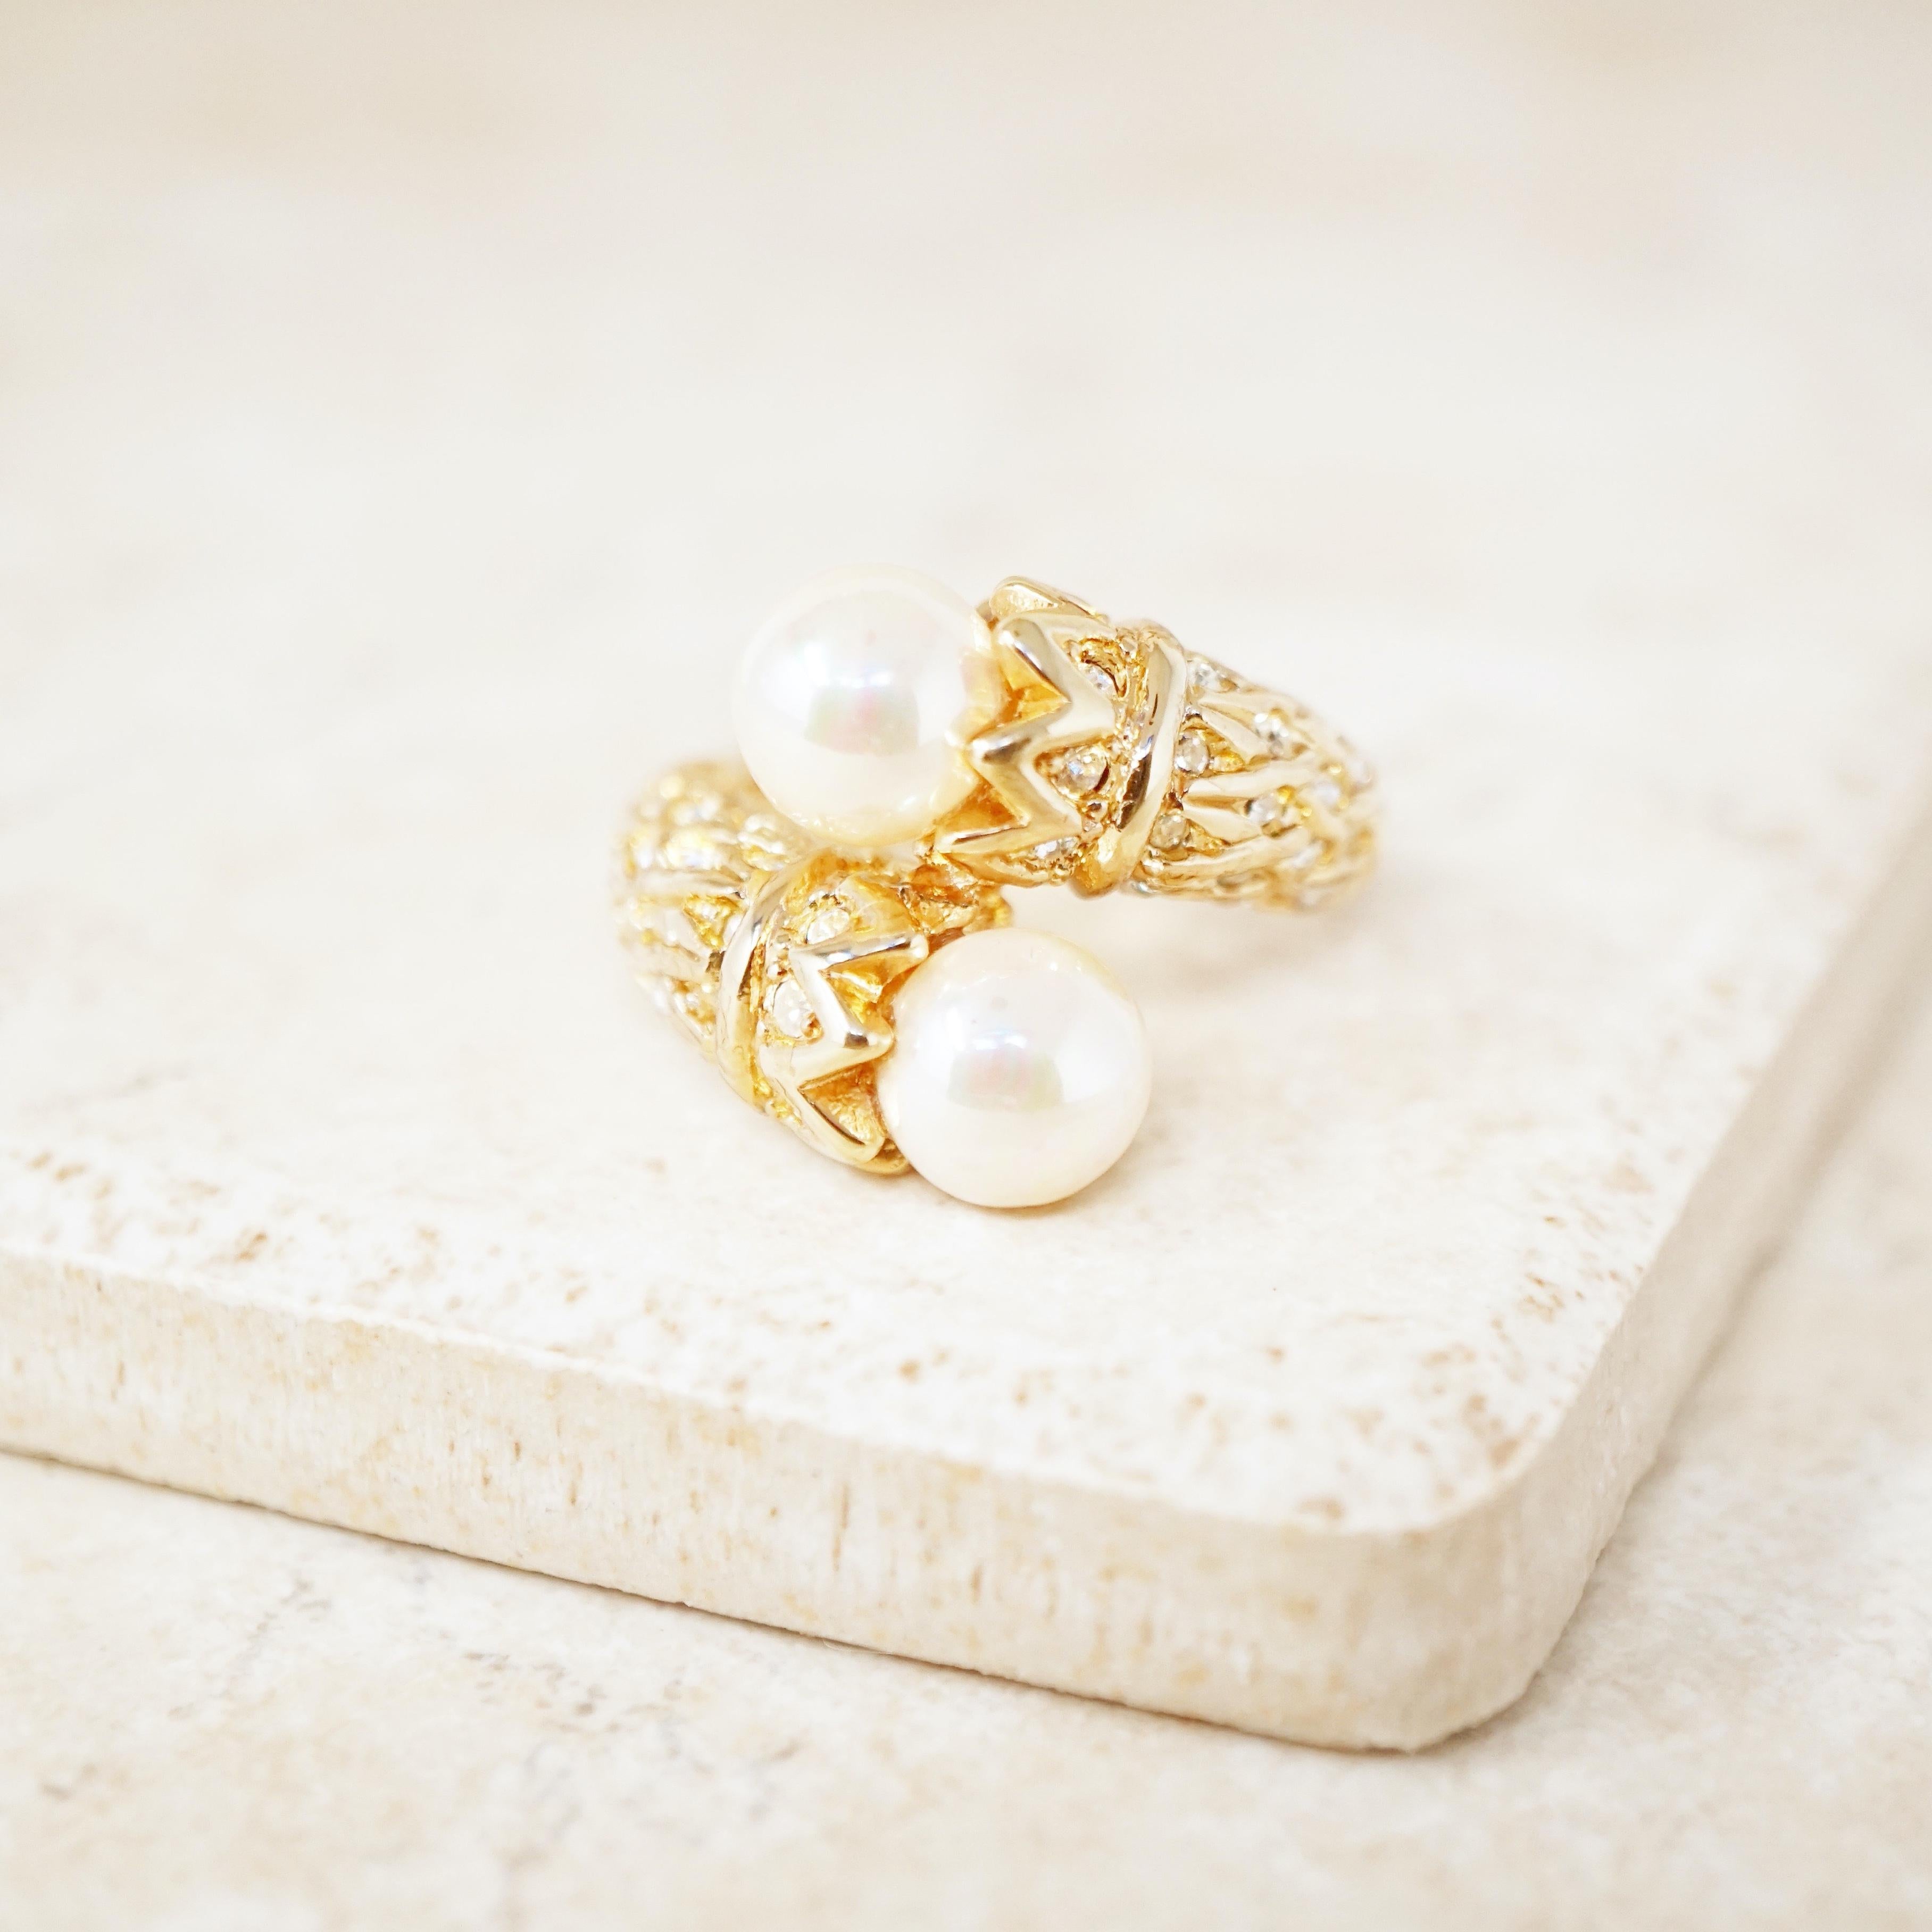 - Vintage item

- Size 6

- Gold plated

- Crystal rhinestone accents

- Faux pearl

- By Nolan Miller (signed on interior)

- Circa 1980s

- Estate acquired

- Excellent vintage condition